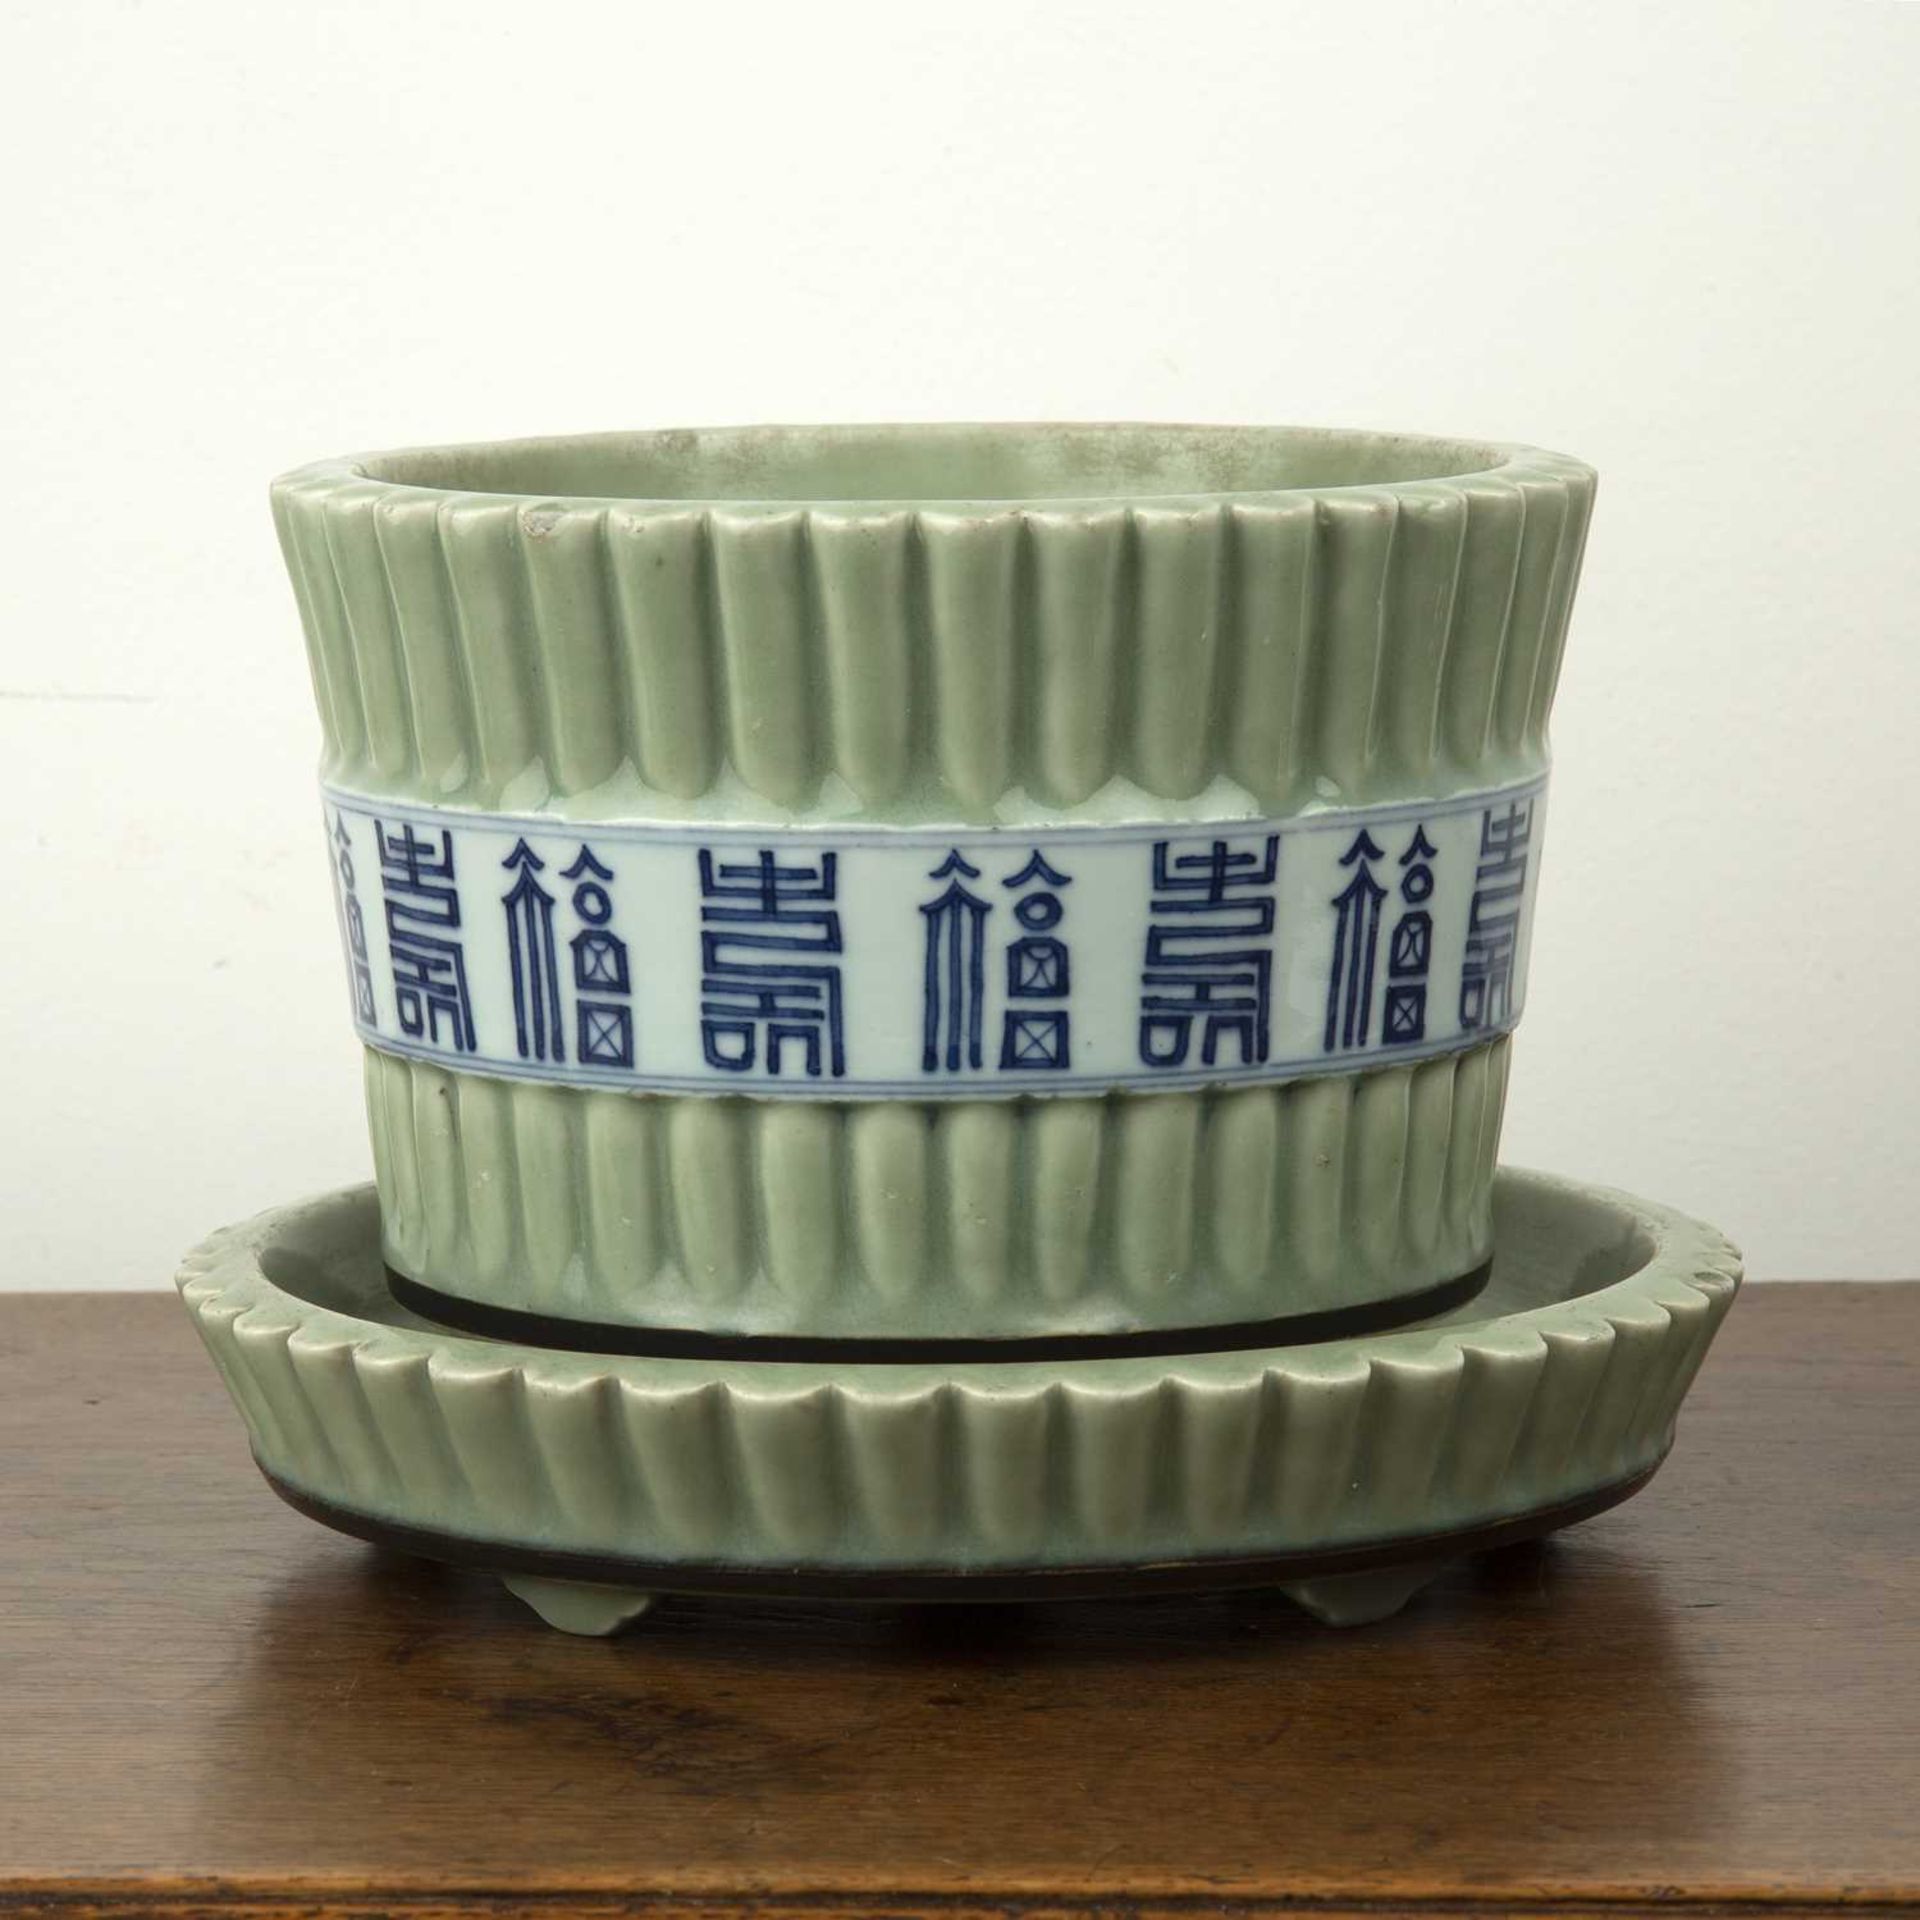 Celadon jardiniere and stand Chinese, 19th Century painted with a band around the centre with blue - Image 2 of 4